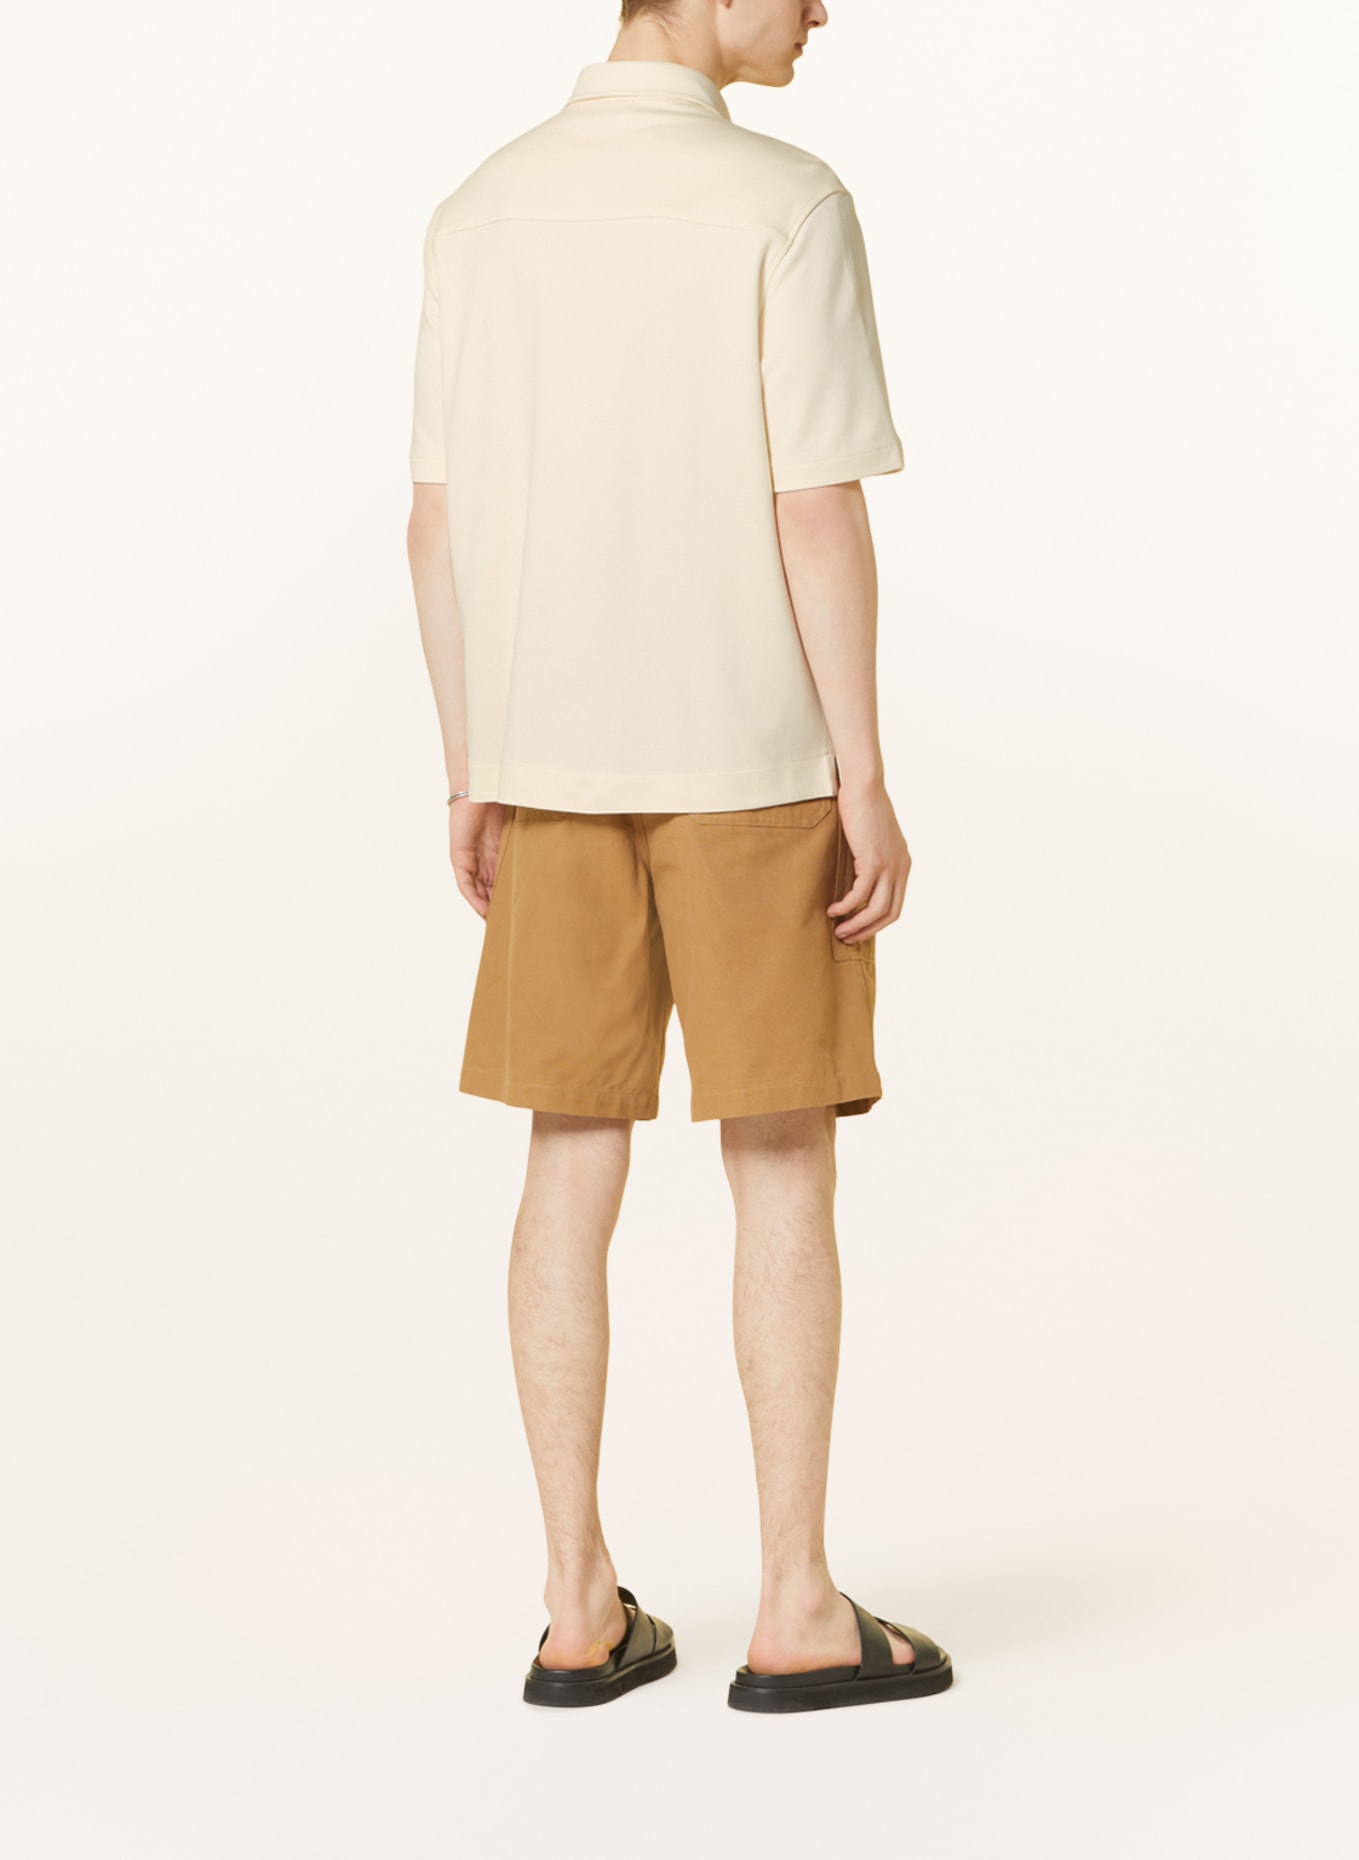 COS Short sleeve shirt relaxed fit, Color: CREAM (Image 3)